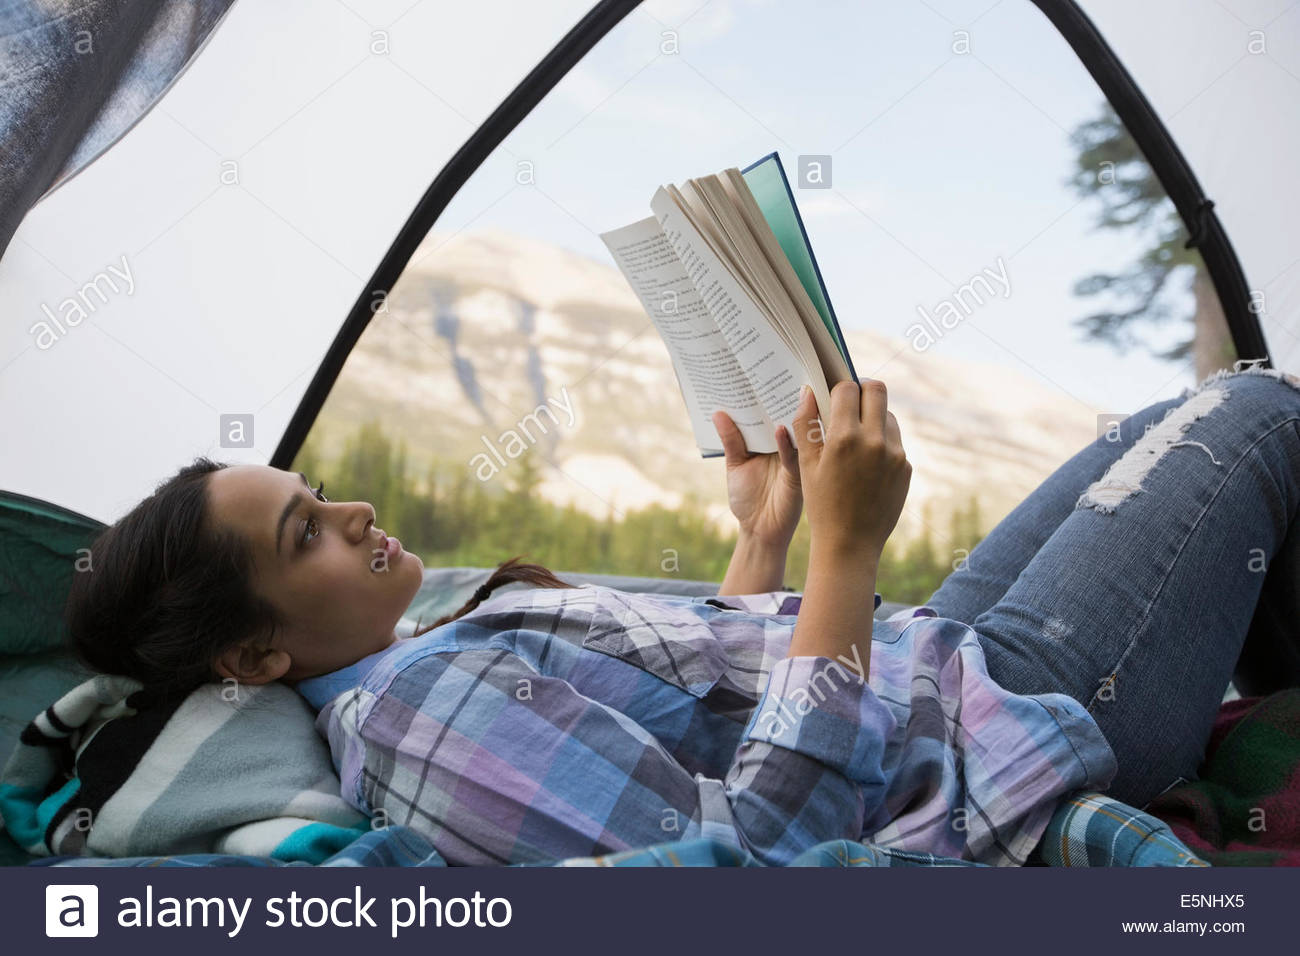 Woman reading book in tent with mountain view Stock Photo